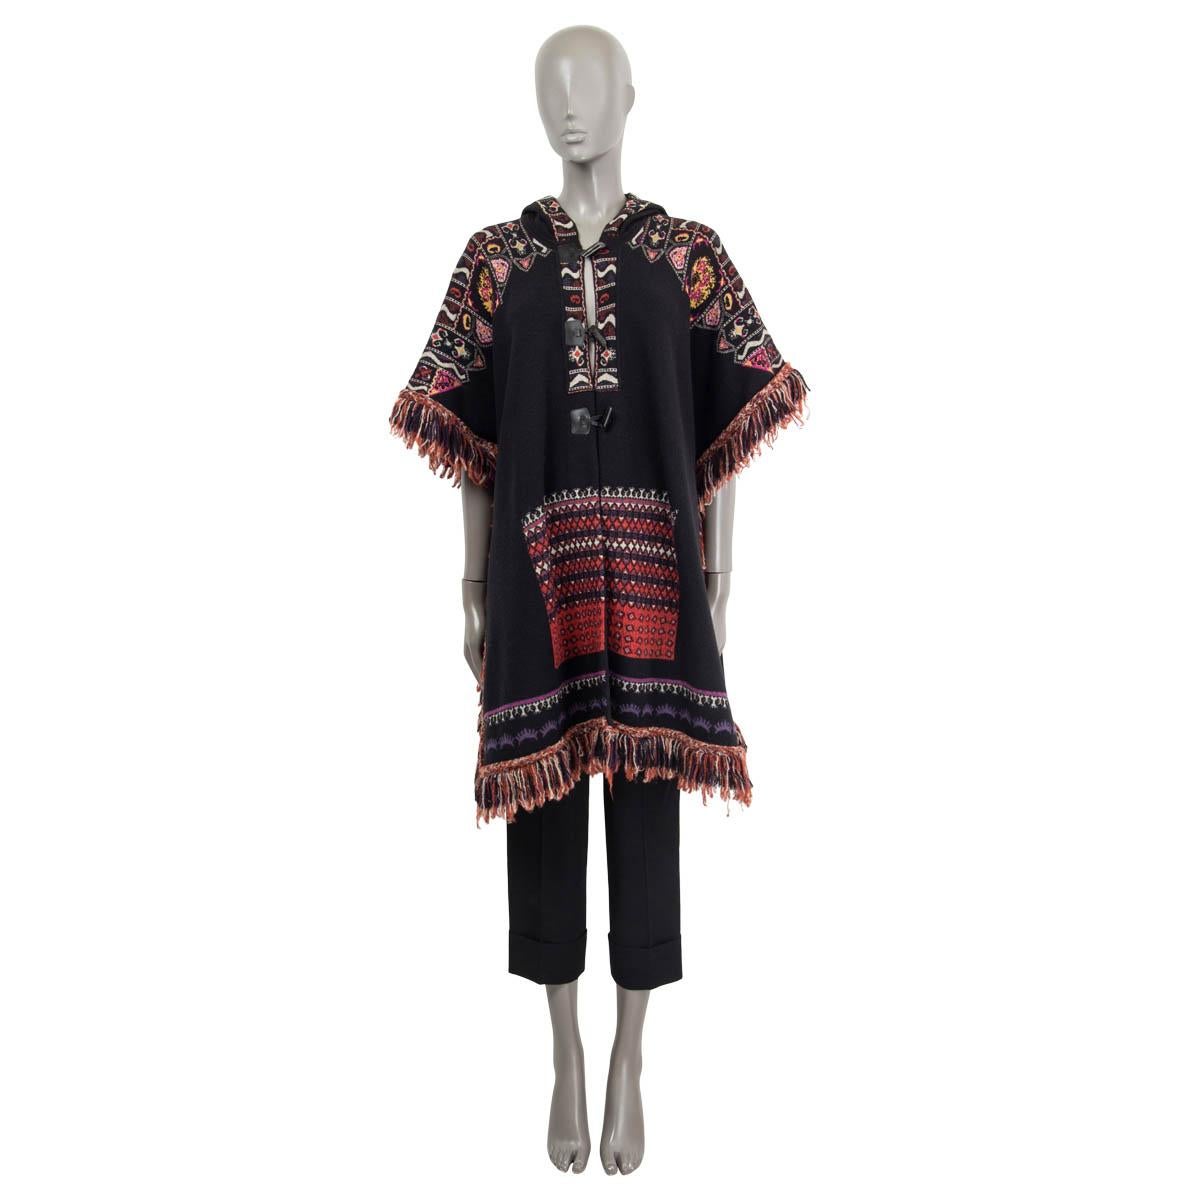 100% authentic Etro hooded knit cape in black , burgundy, brick, purple and pink wool (90%), viscose (3%), silk (2%), acrylic (2%), polyamide (2%) and polyester (1%) (Please note the content & brand tag are missing). Features fringed trims and